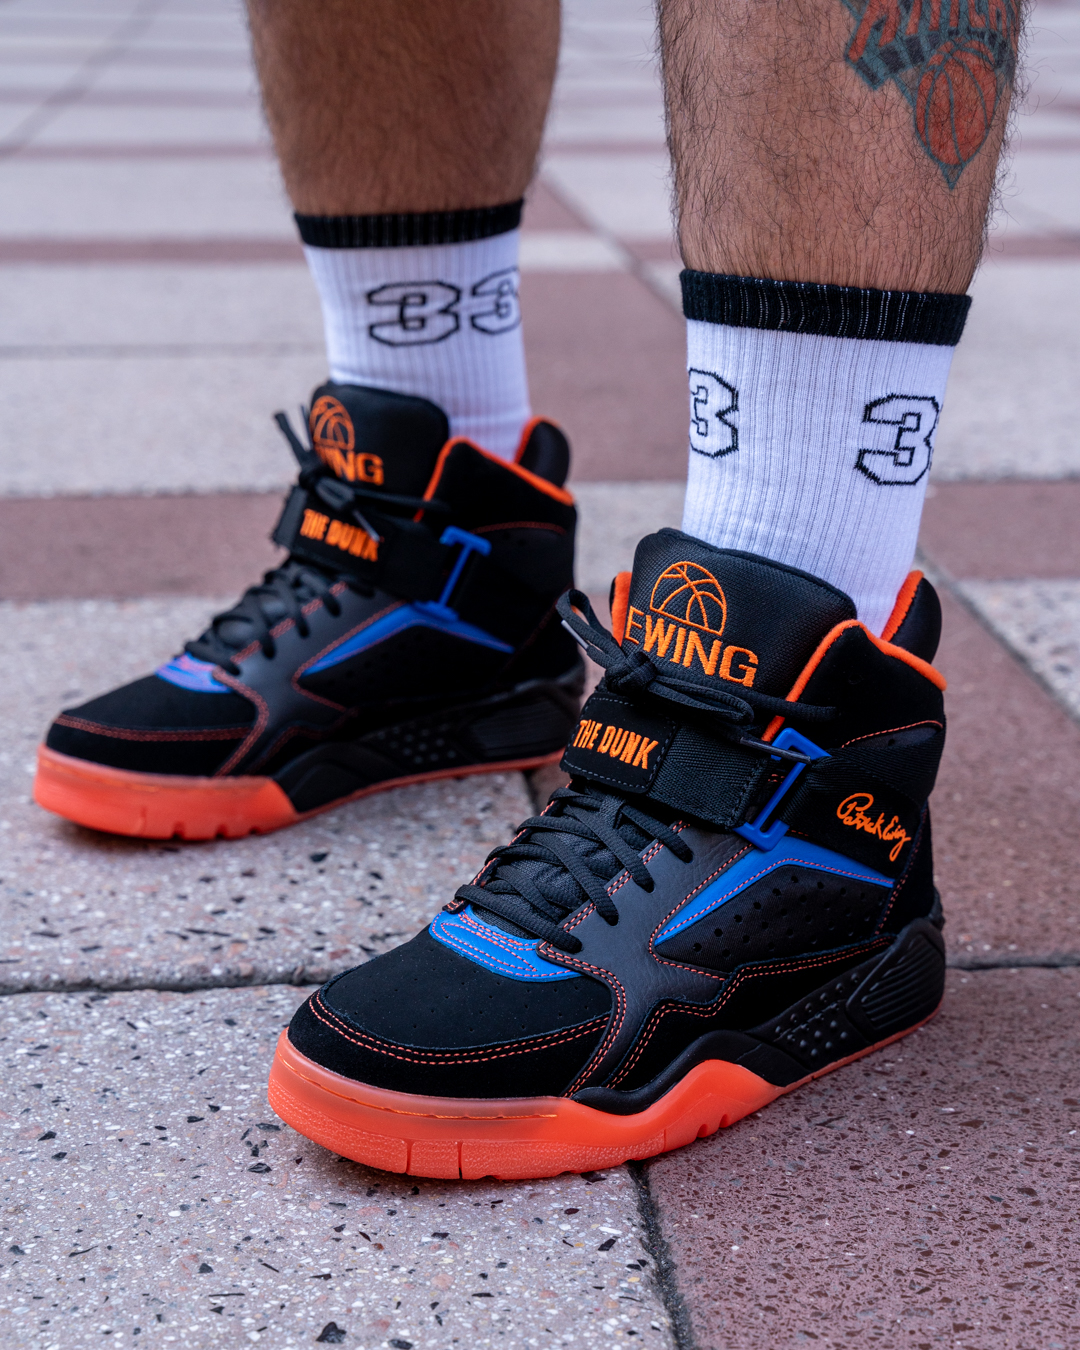 patrick ewing shoes on feet